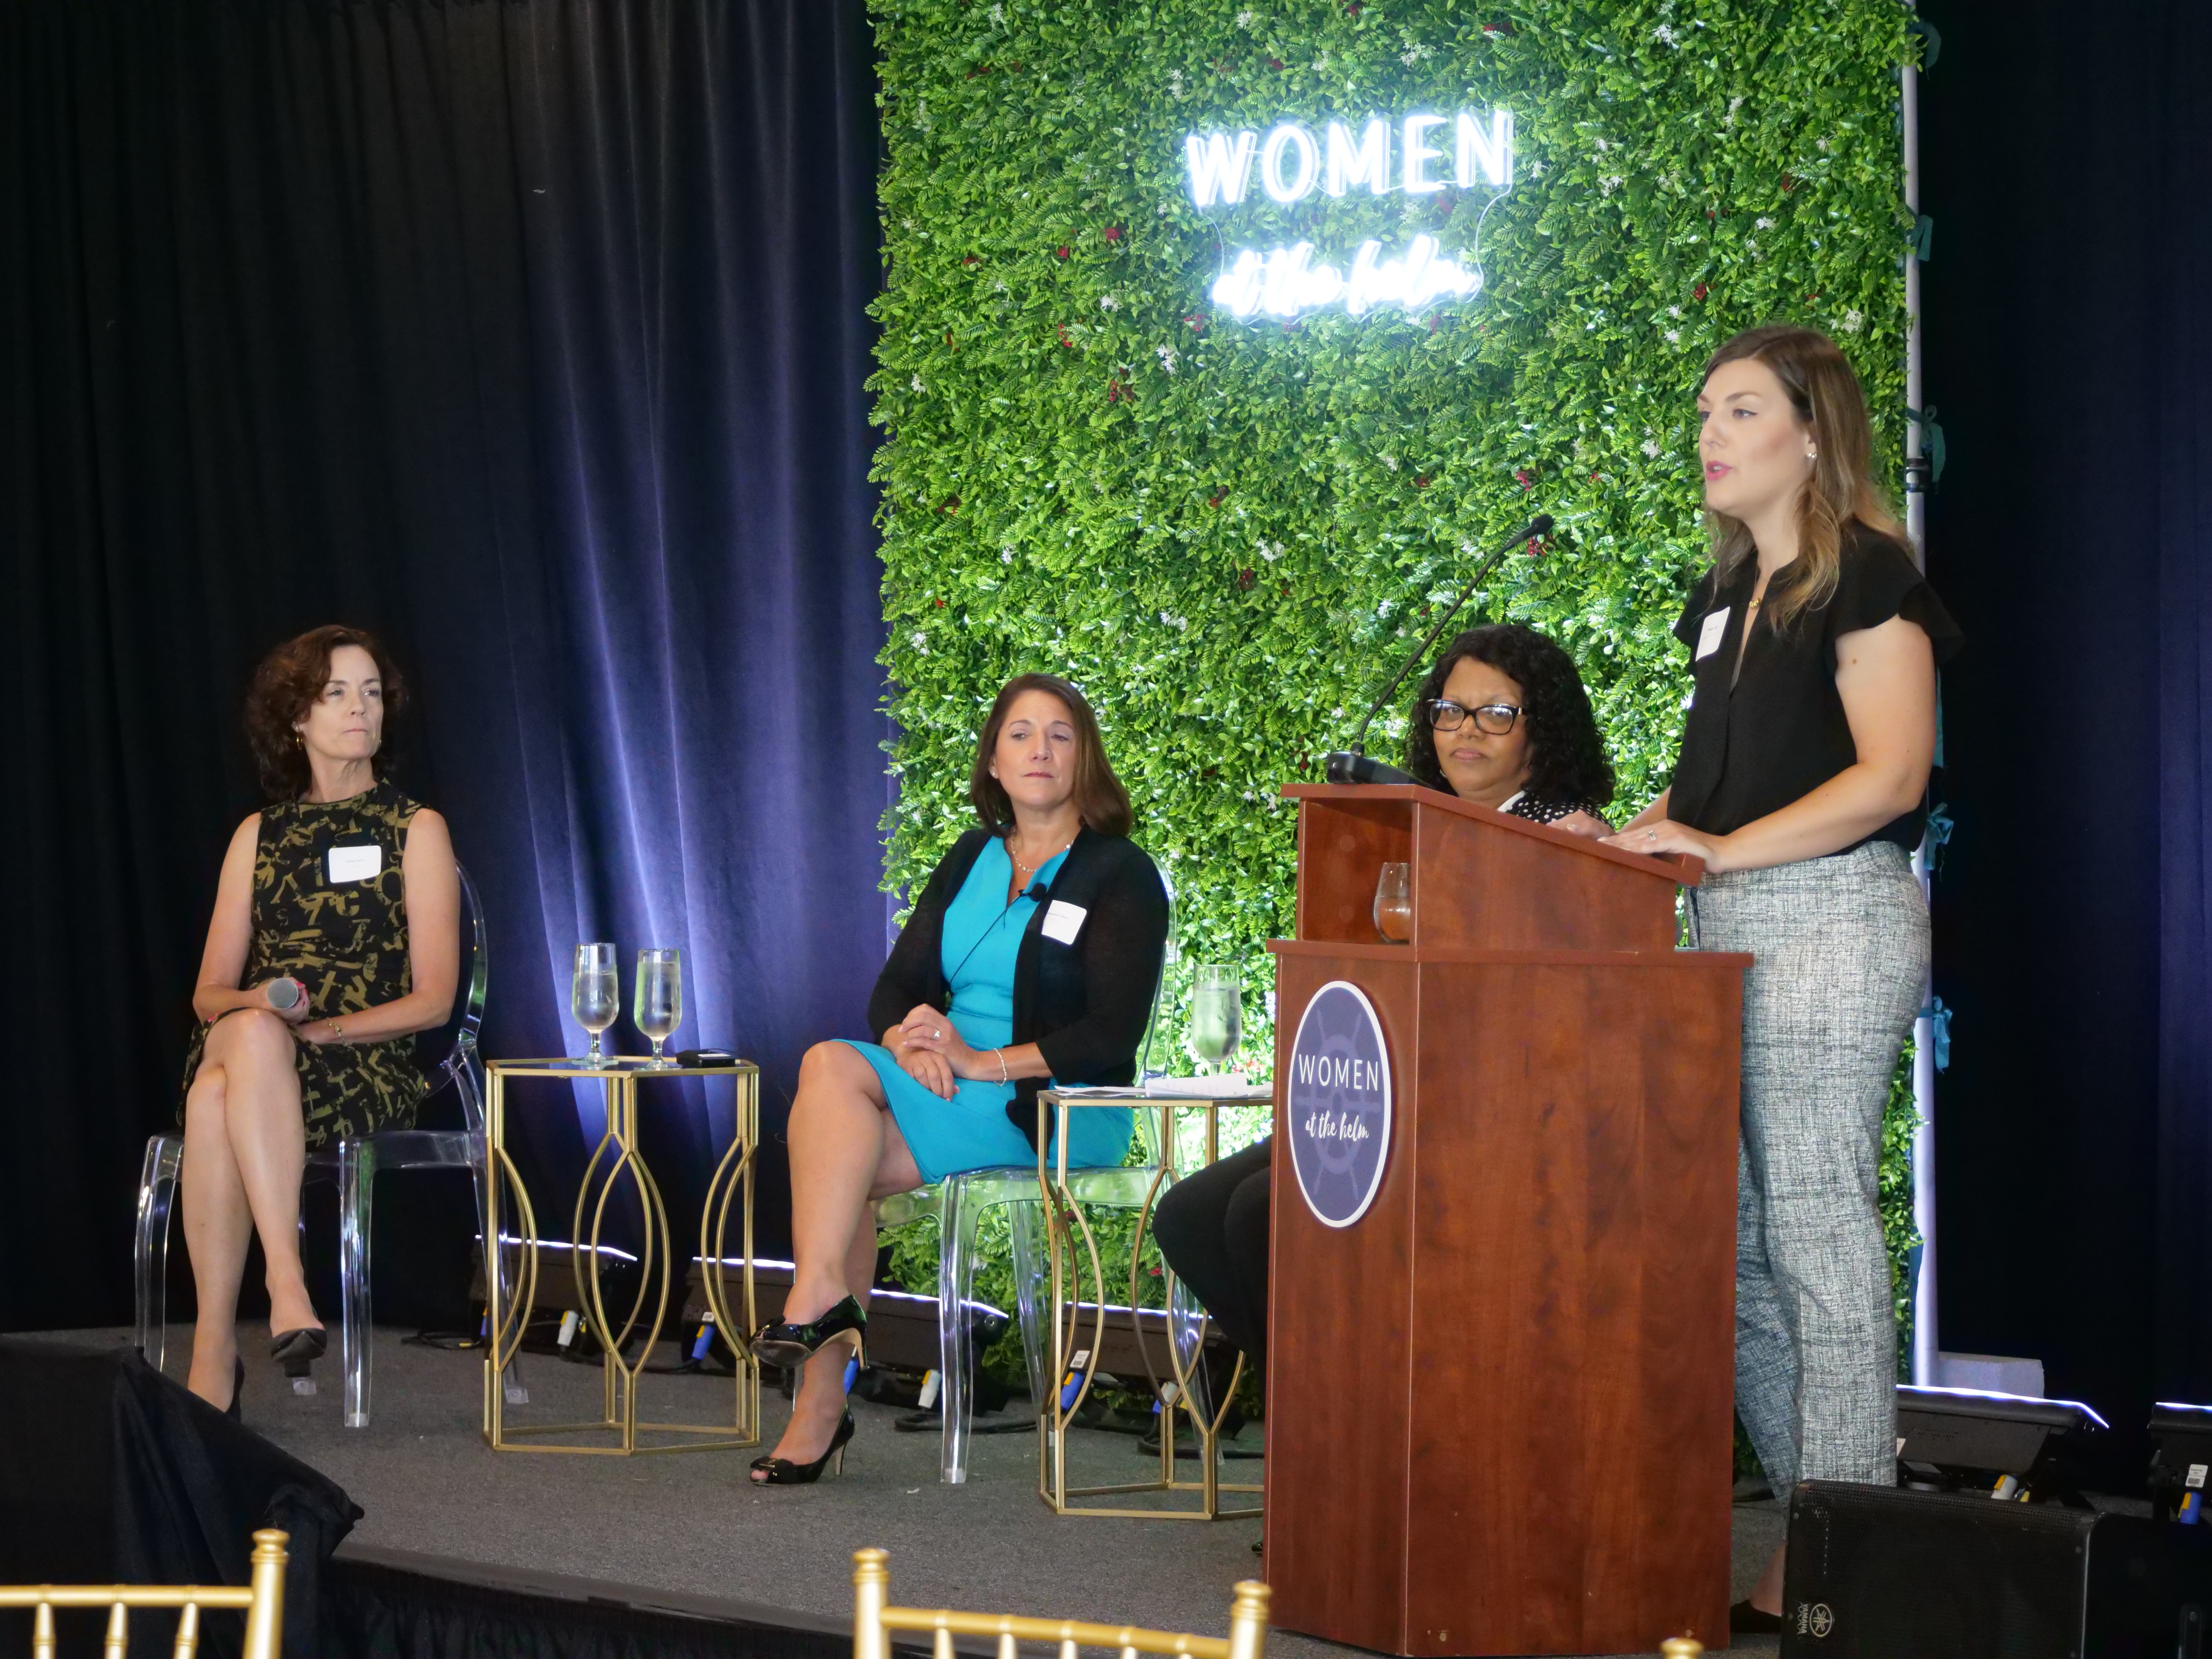 Women at the helm event